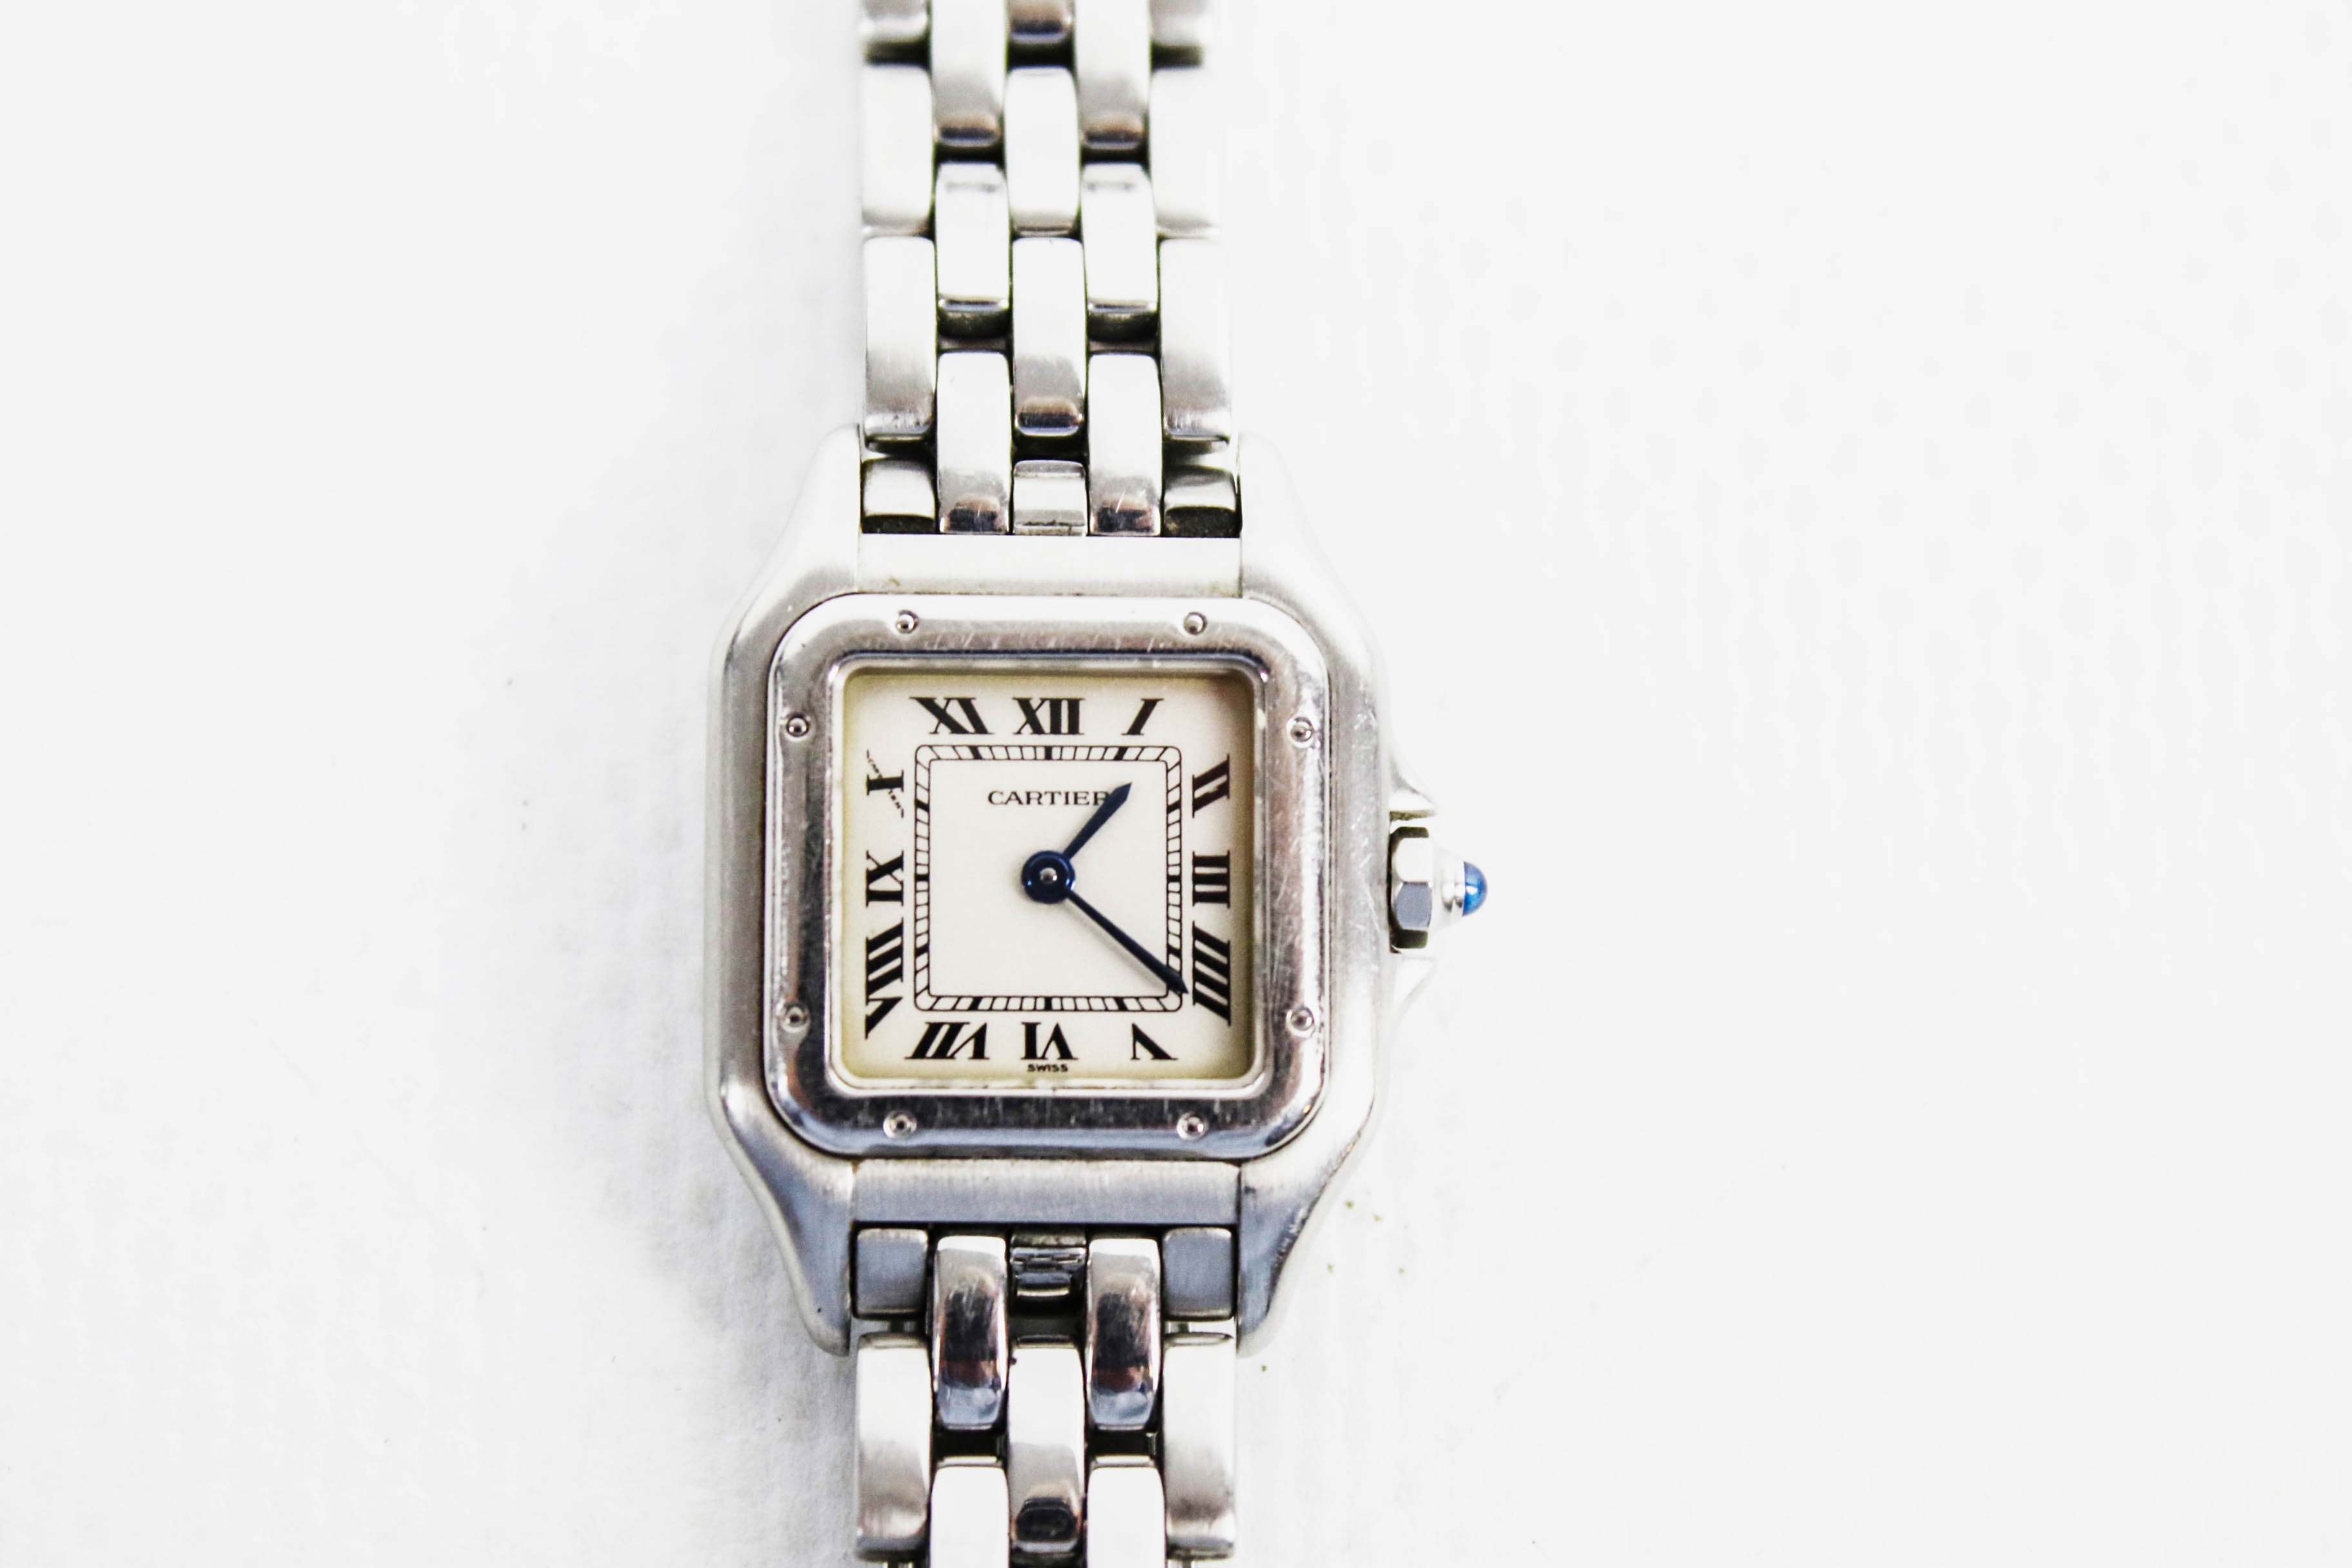 Cartier, Panthere, a lady's stainless steel bracelet watch, circa 2003, Ref 1320.